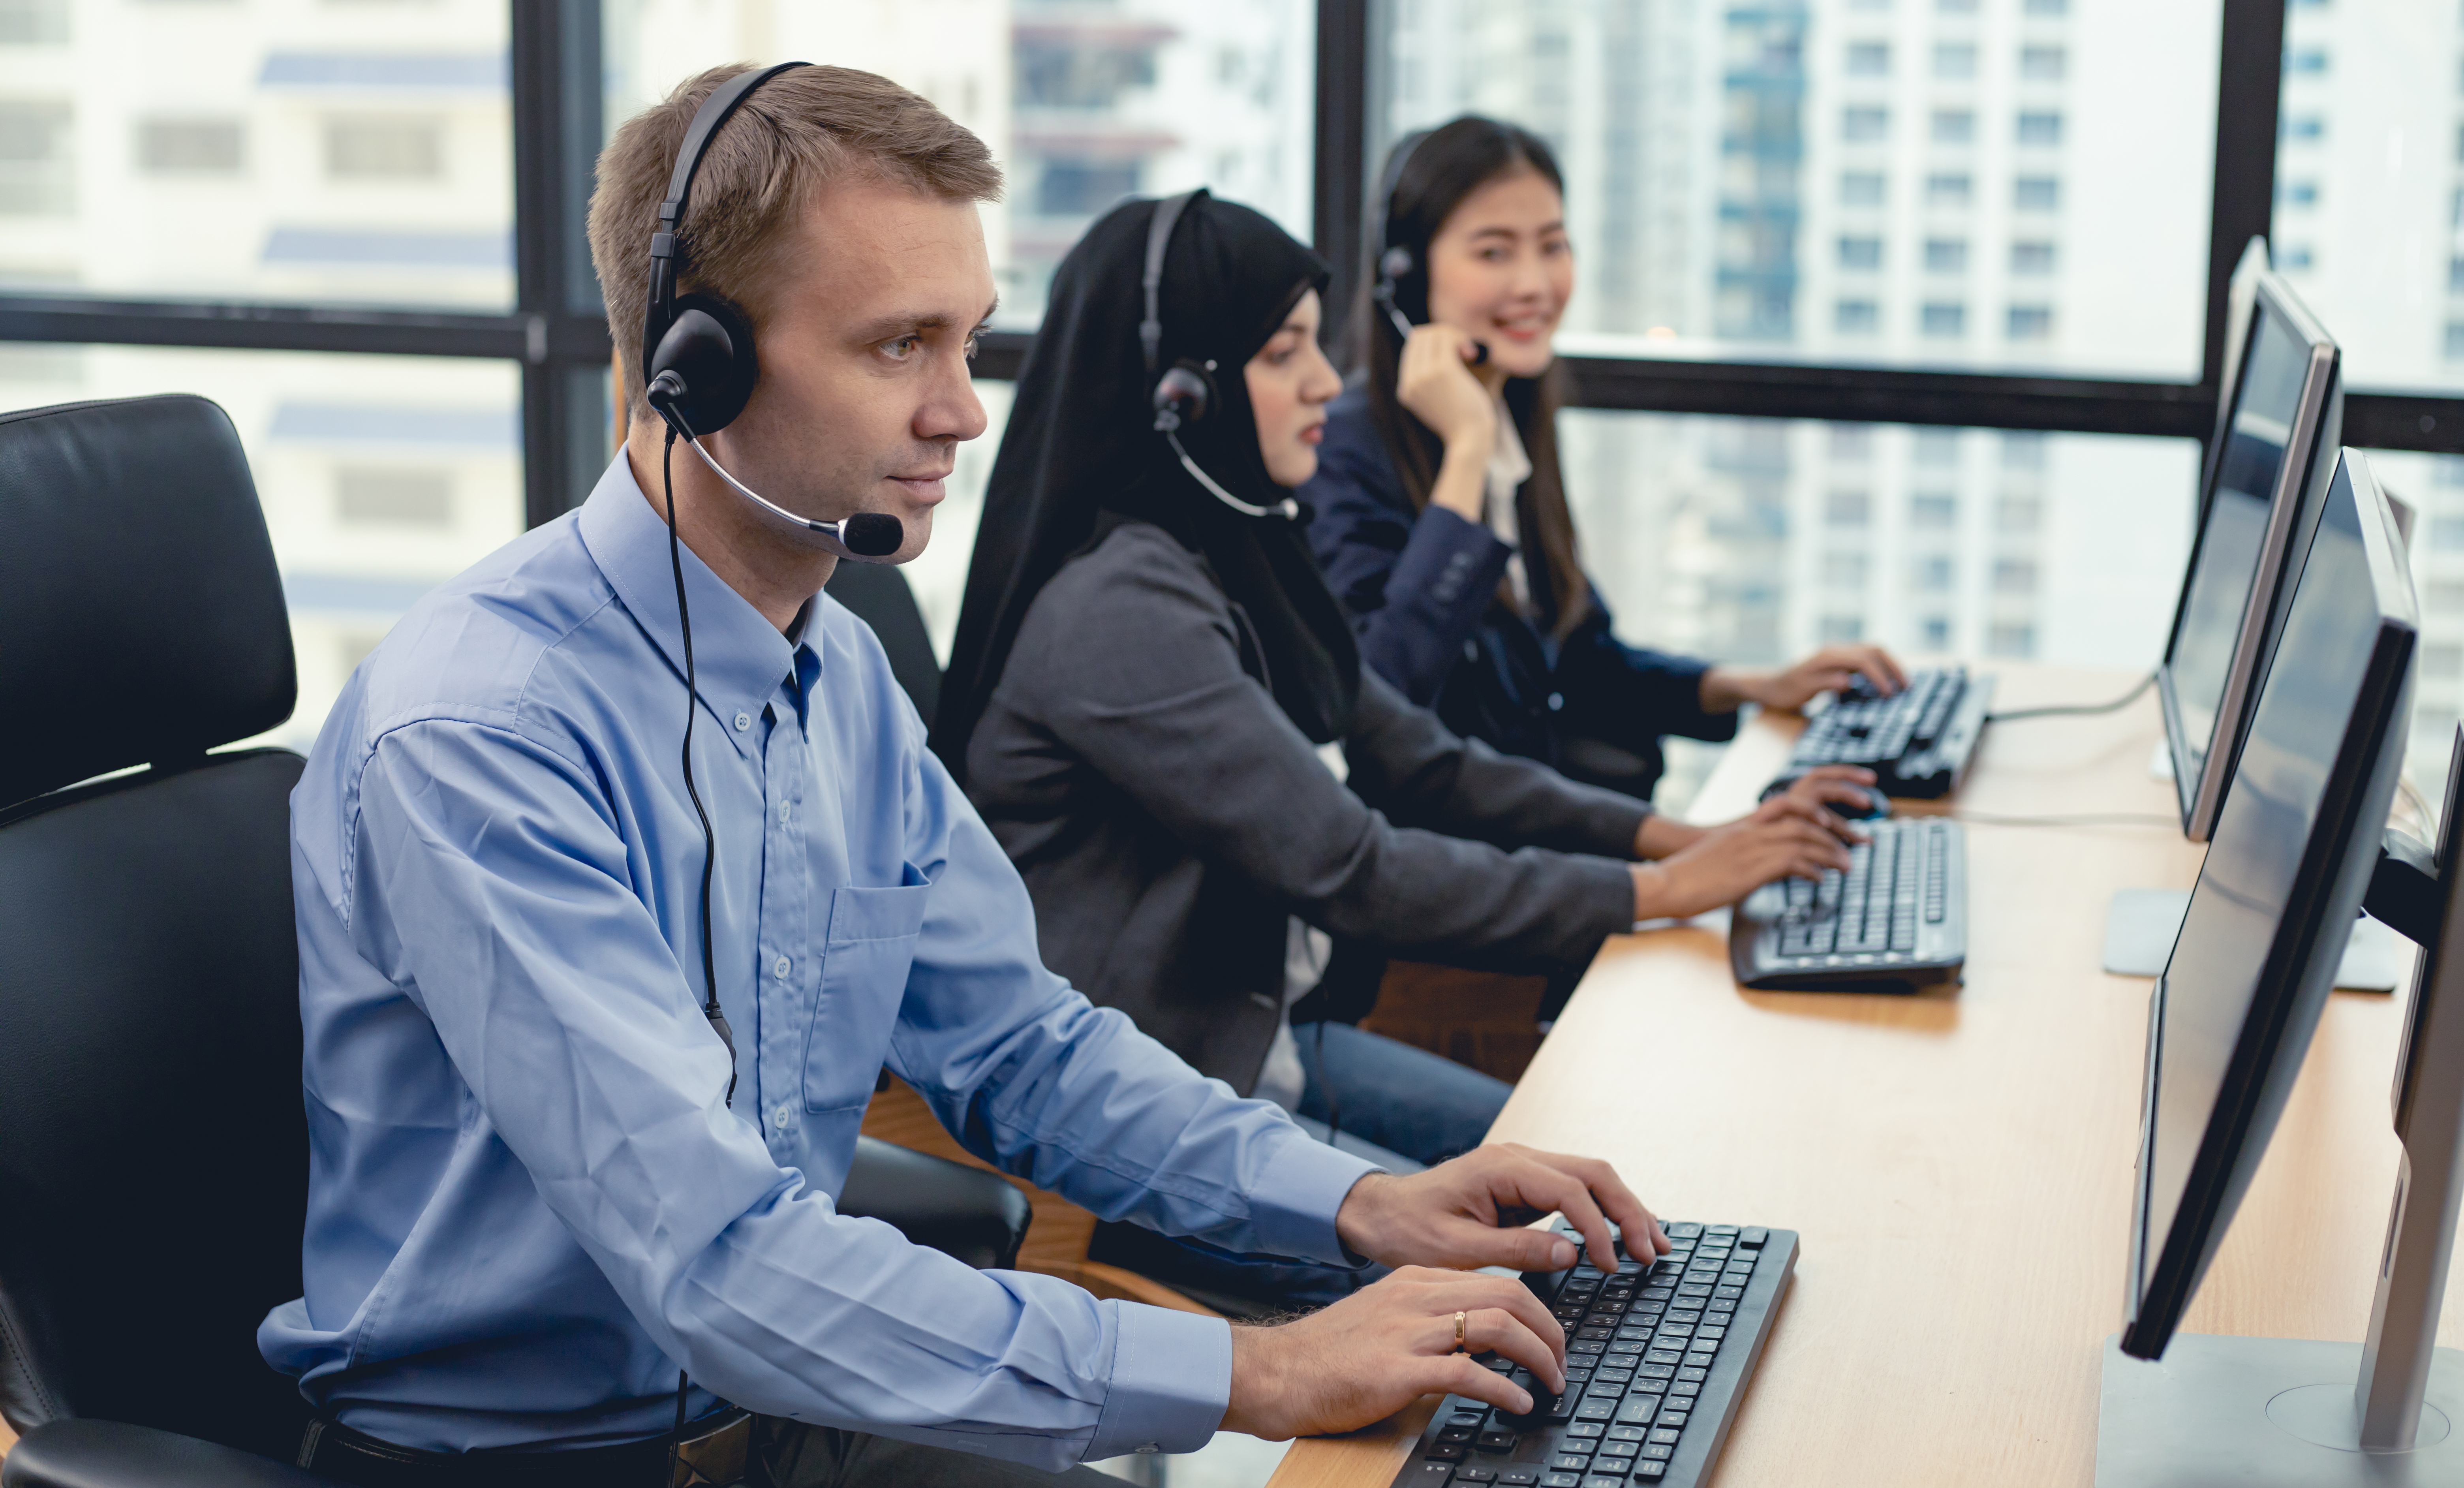 Group of diverse telemarketing customer service staff team in call center.